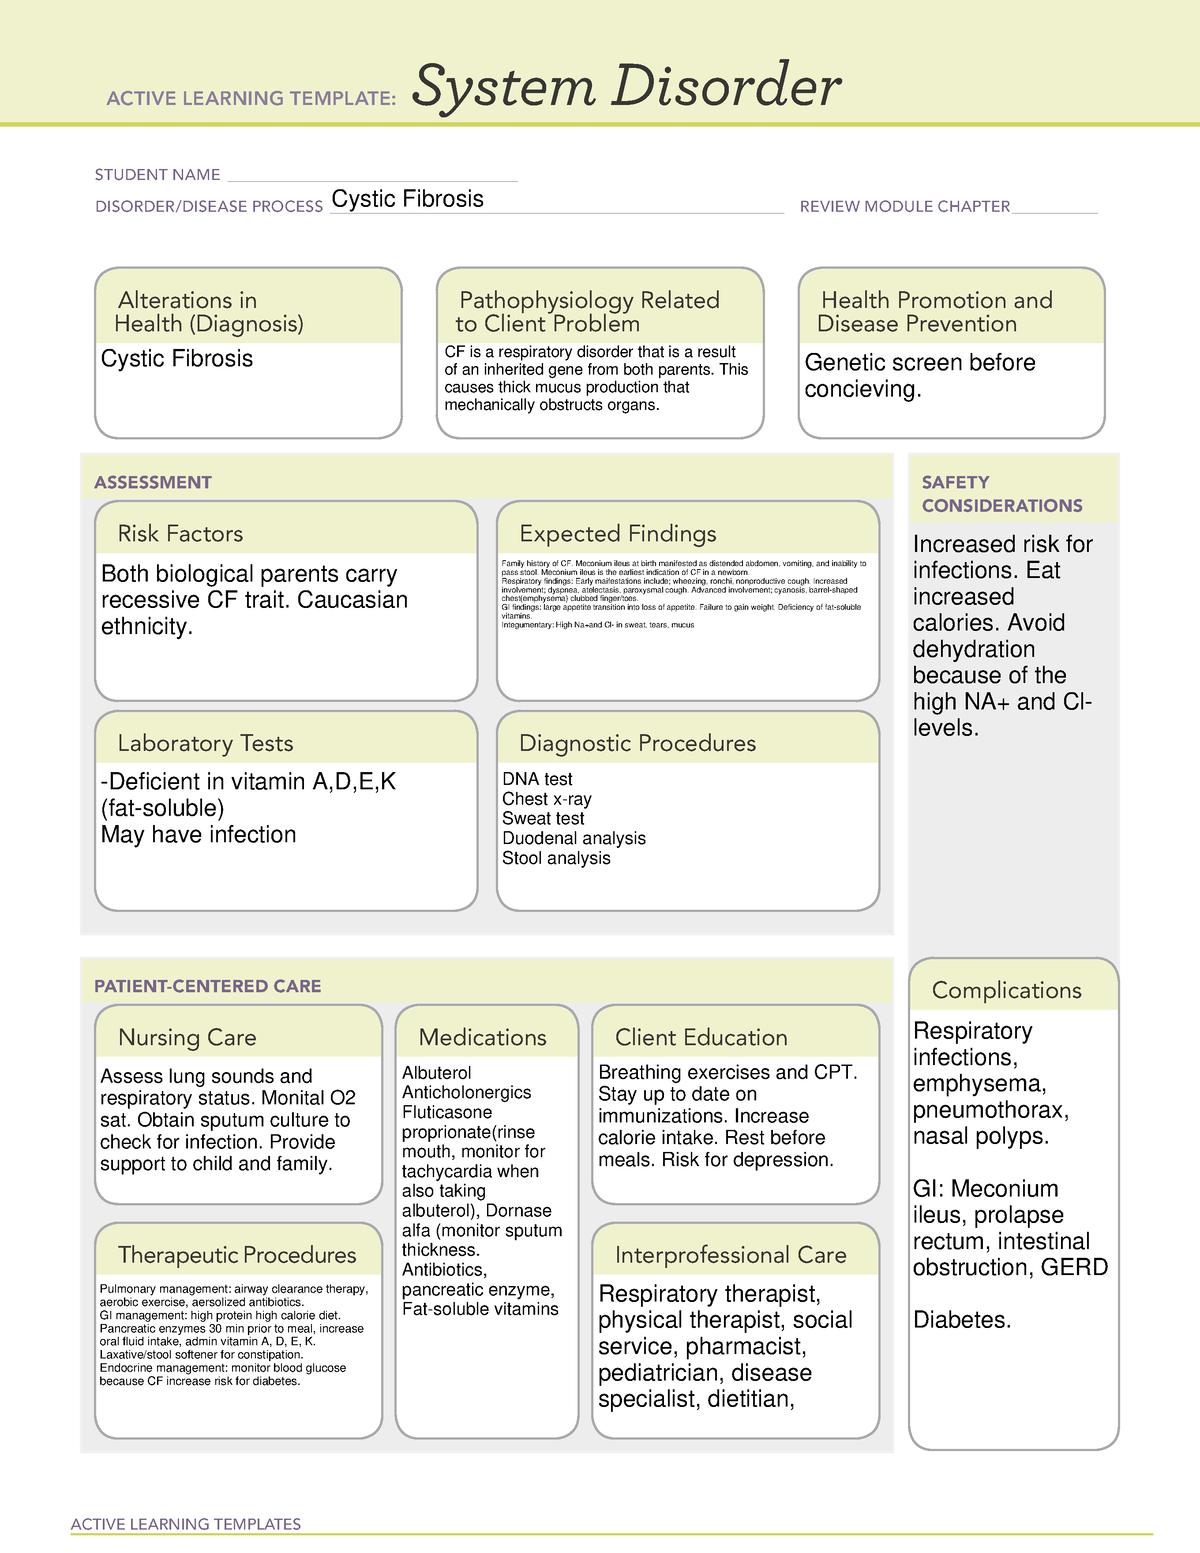 cystic-fibrosis-concept-map-active-learning-templates-system-disorder-student-name-studocu